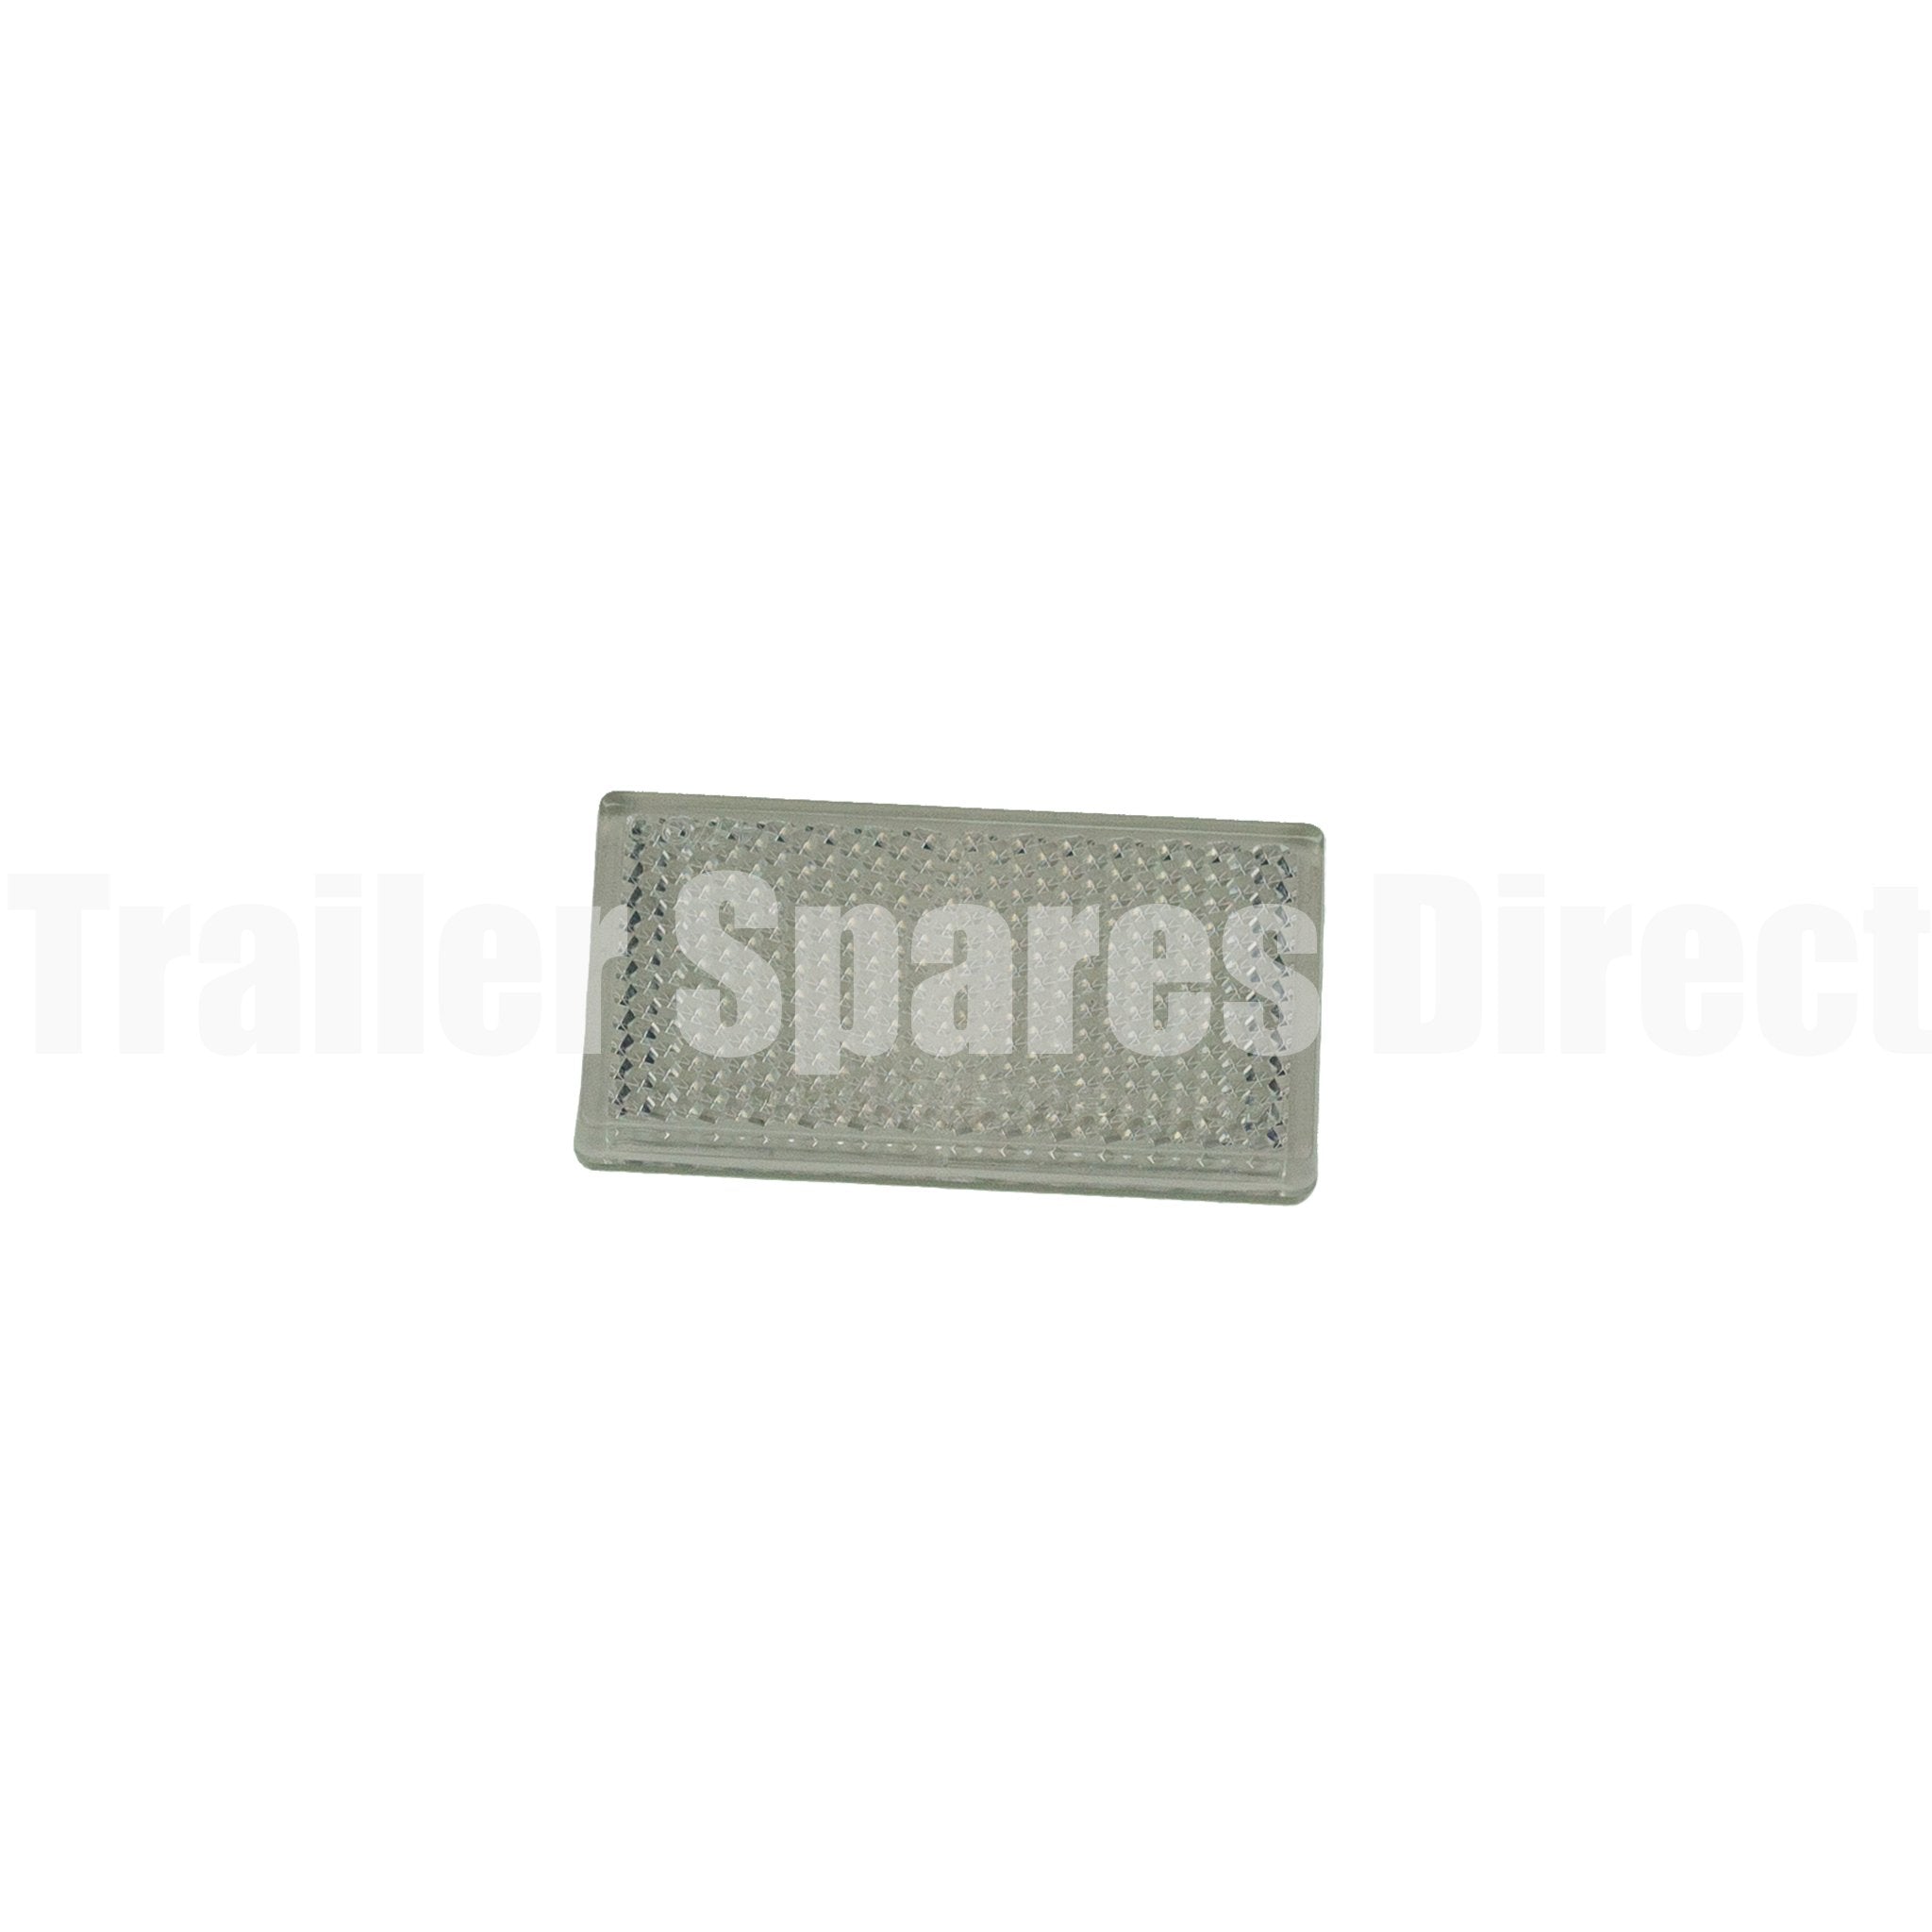 Reflector clear 30mm x 60mm rectangle adhesive